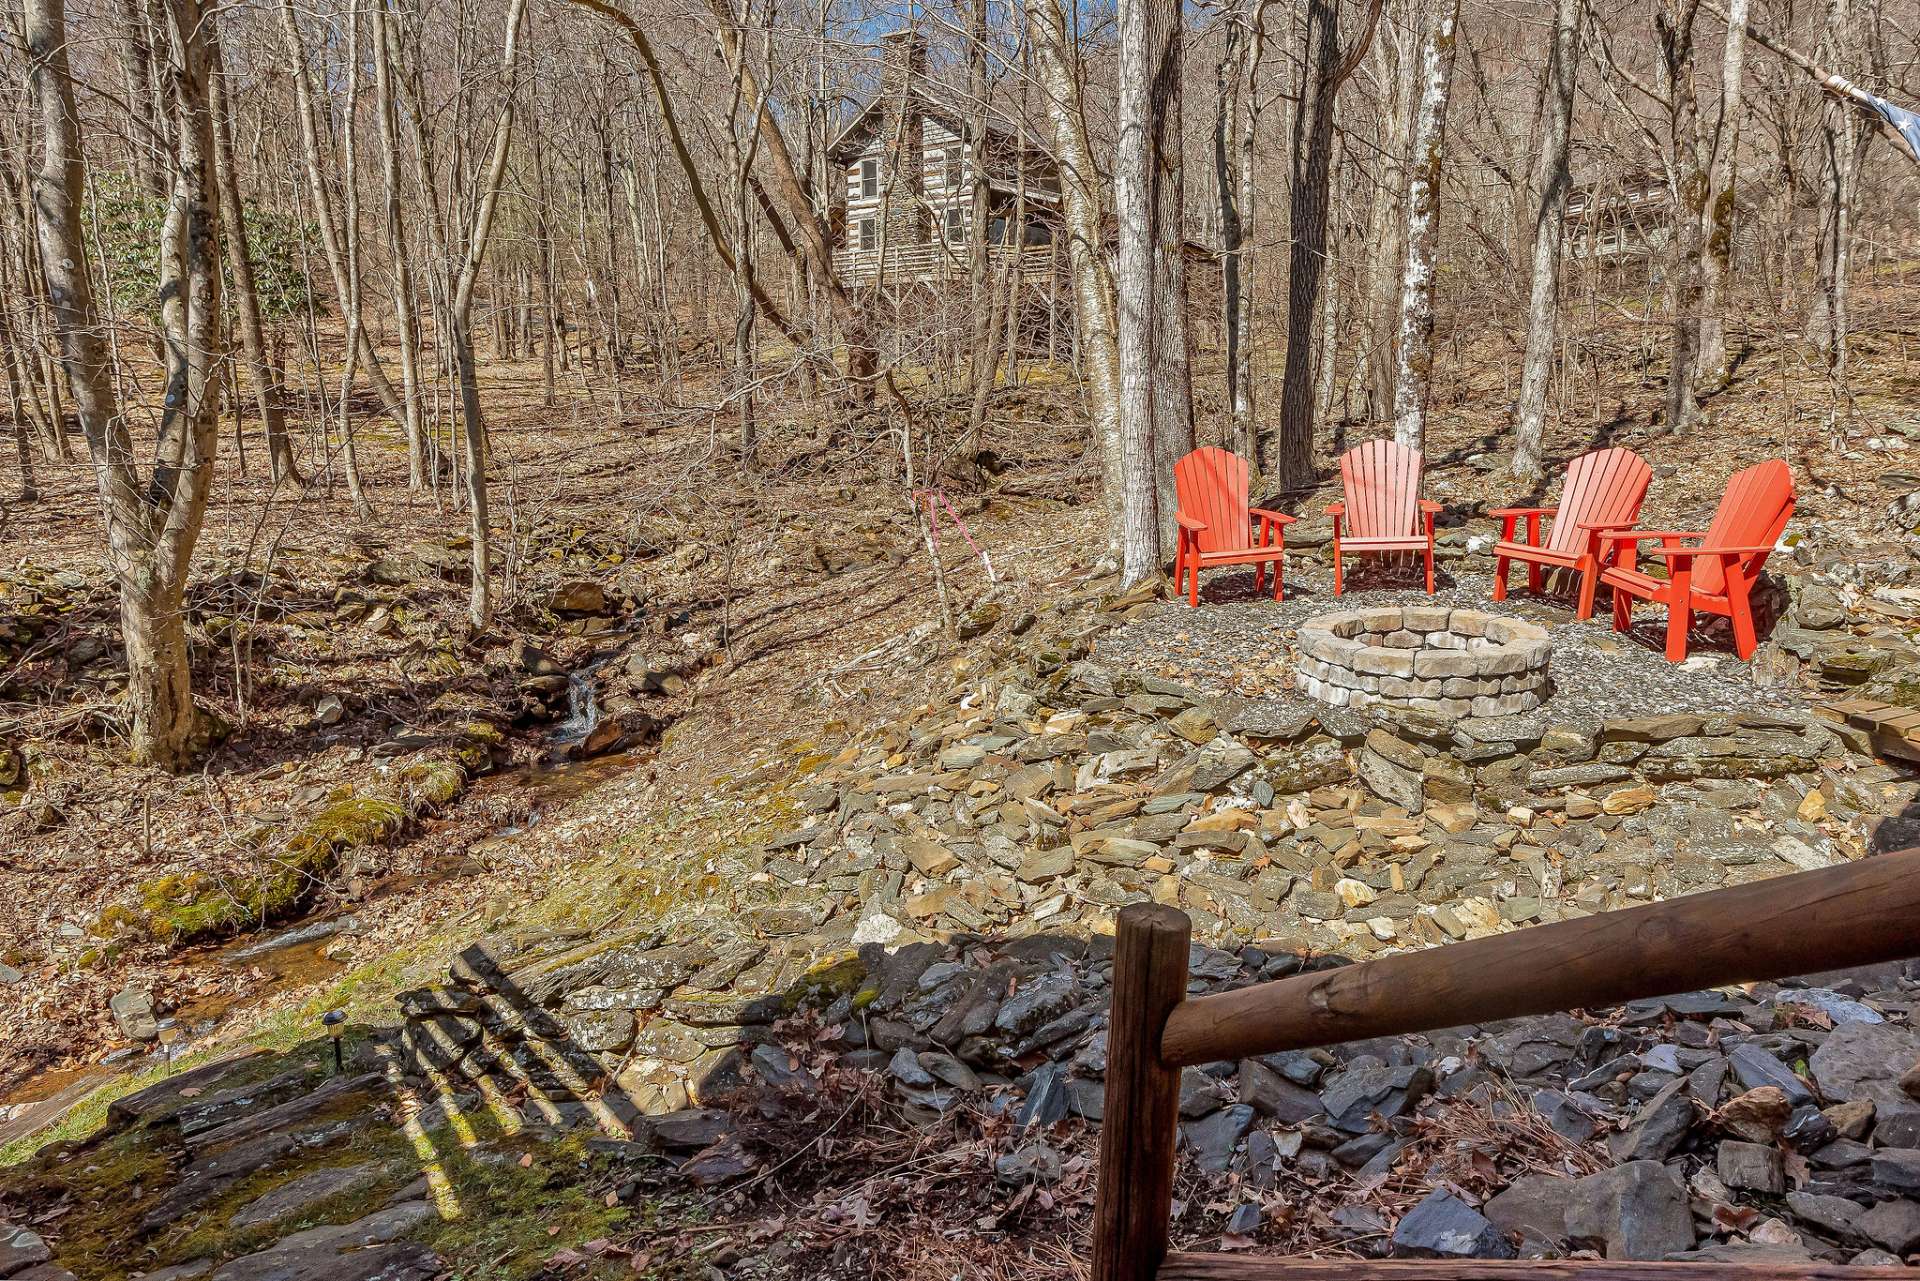 This cabin's fire pit by the stream is an absolute gem. Imagine gathering around with loved ones, roasting marshmallows, and sharing stories as the sound of the stream adds to the ambiance.